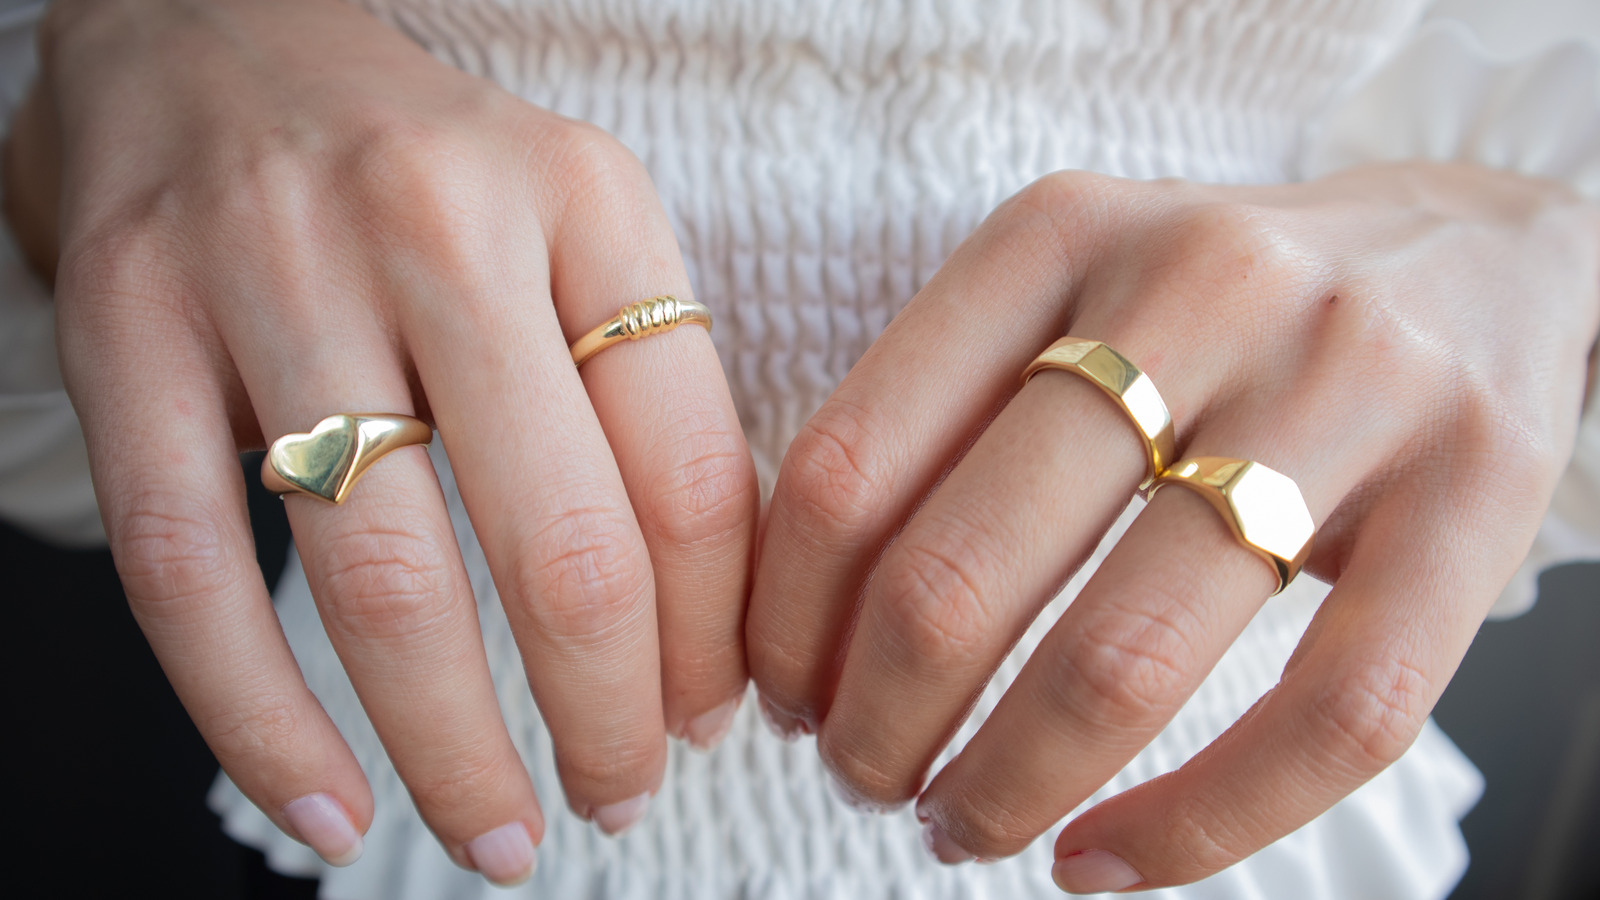 The Real Reason Why Wedding Rings Are Worn on the Left Ring Finger